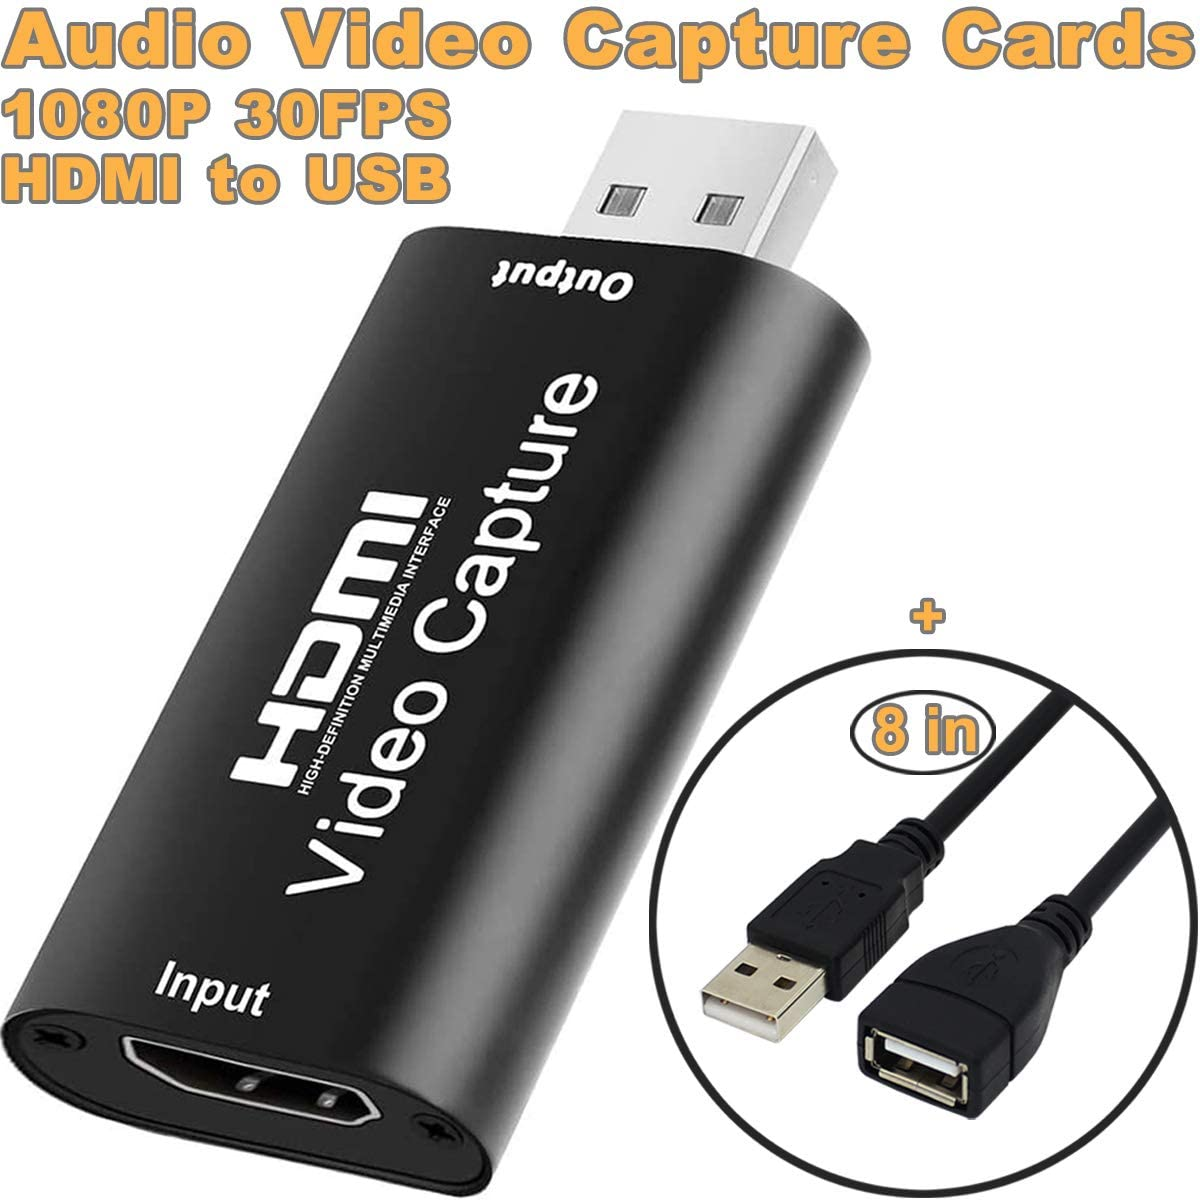 An example of a cheap HDMI capture dongle listing image from Amazon.